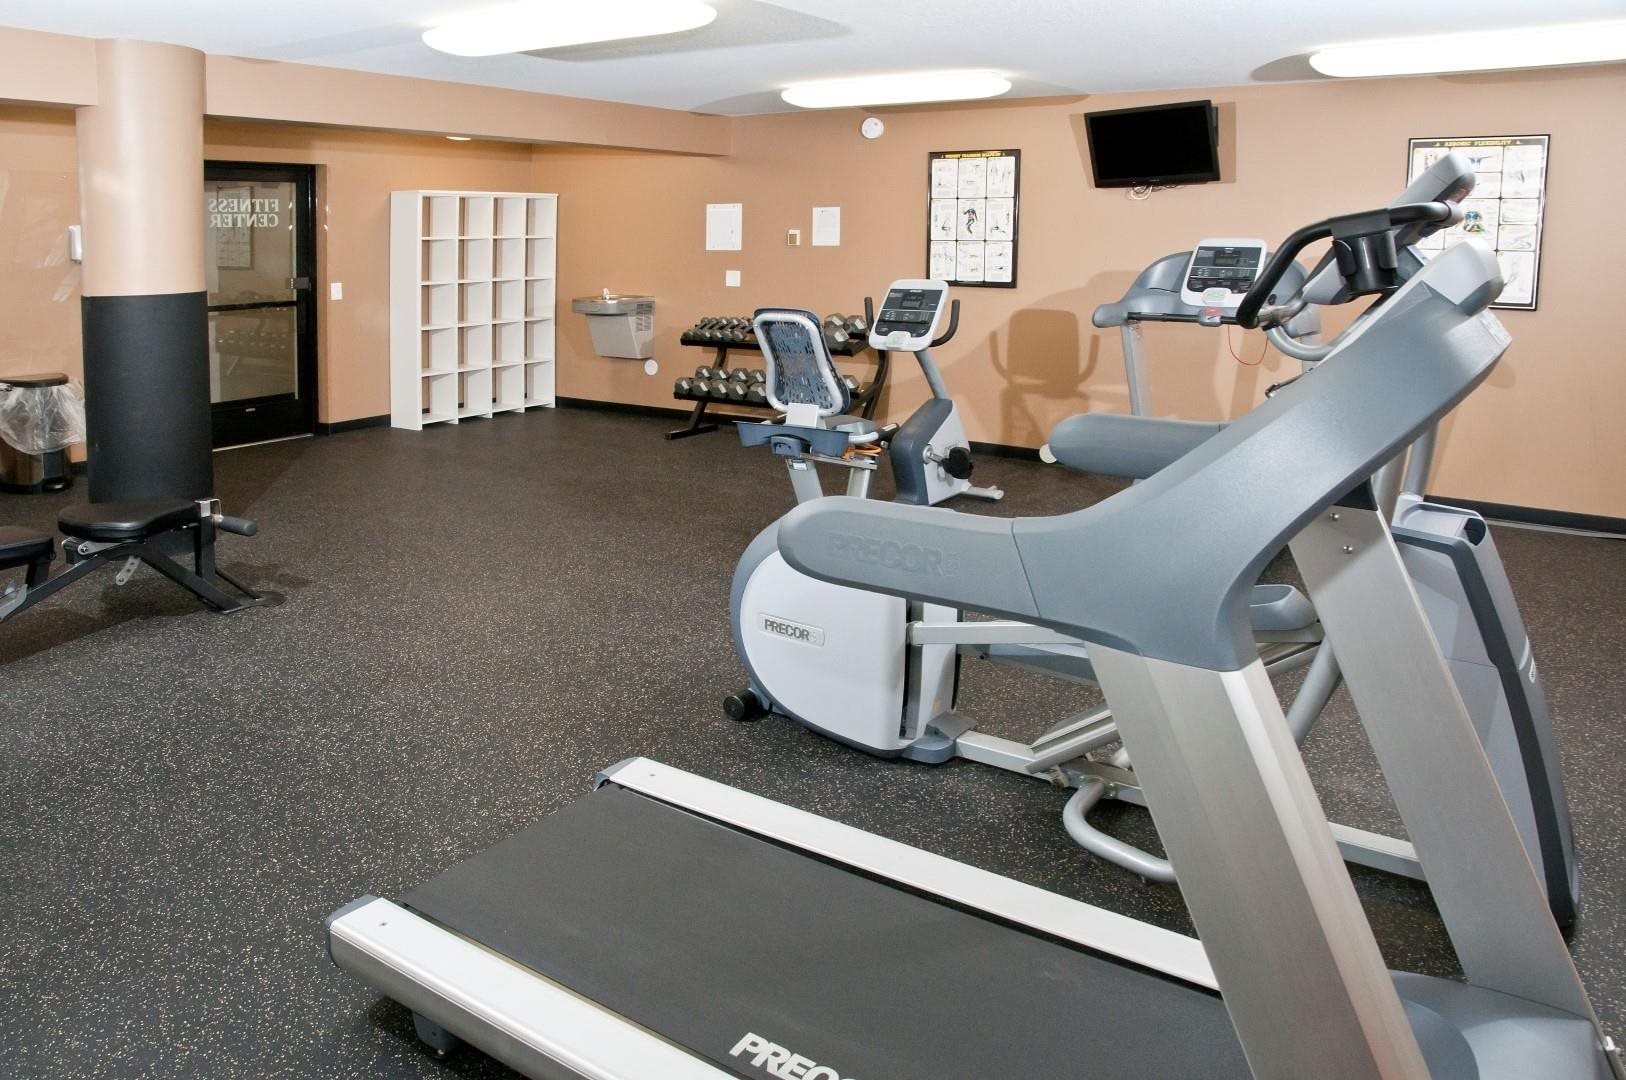 Fitness Room of St. Louis Park Apartment With Cardio Equipment and Free Weights